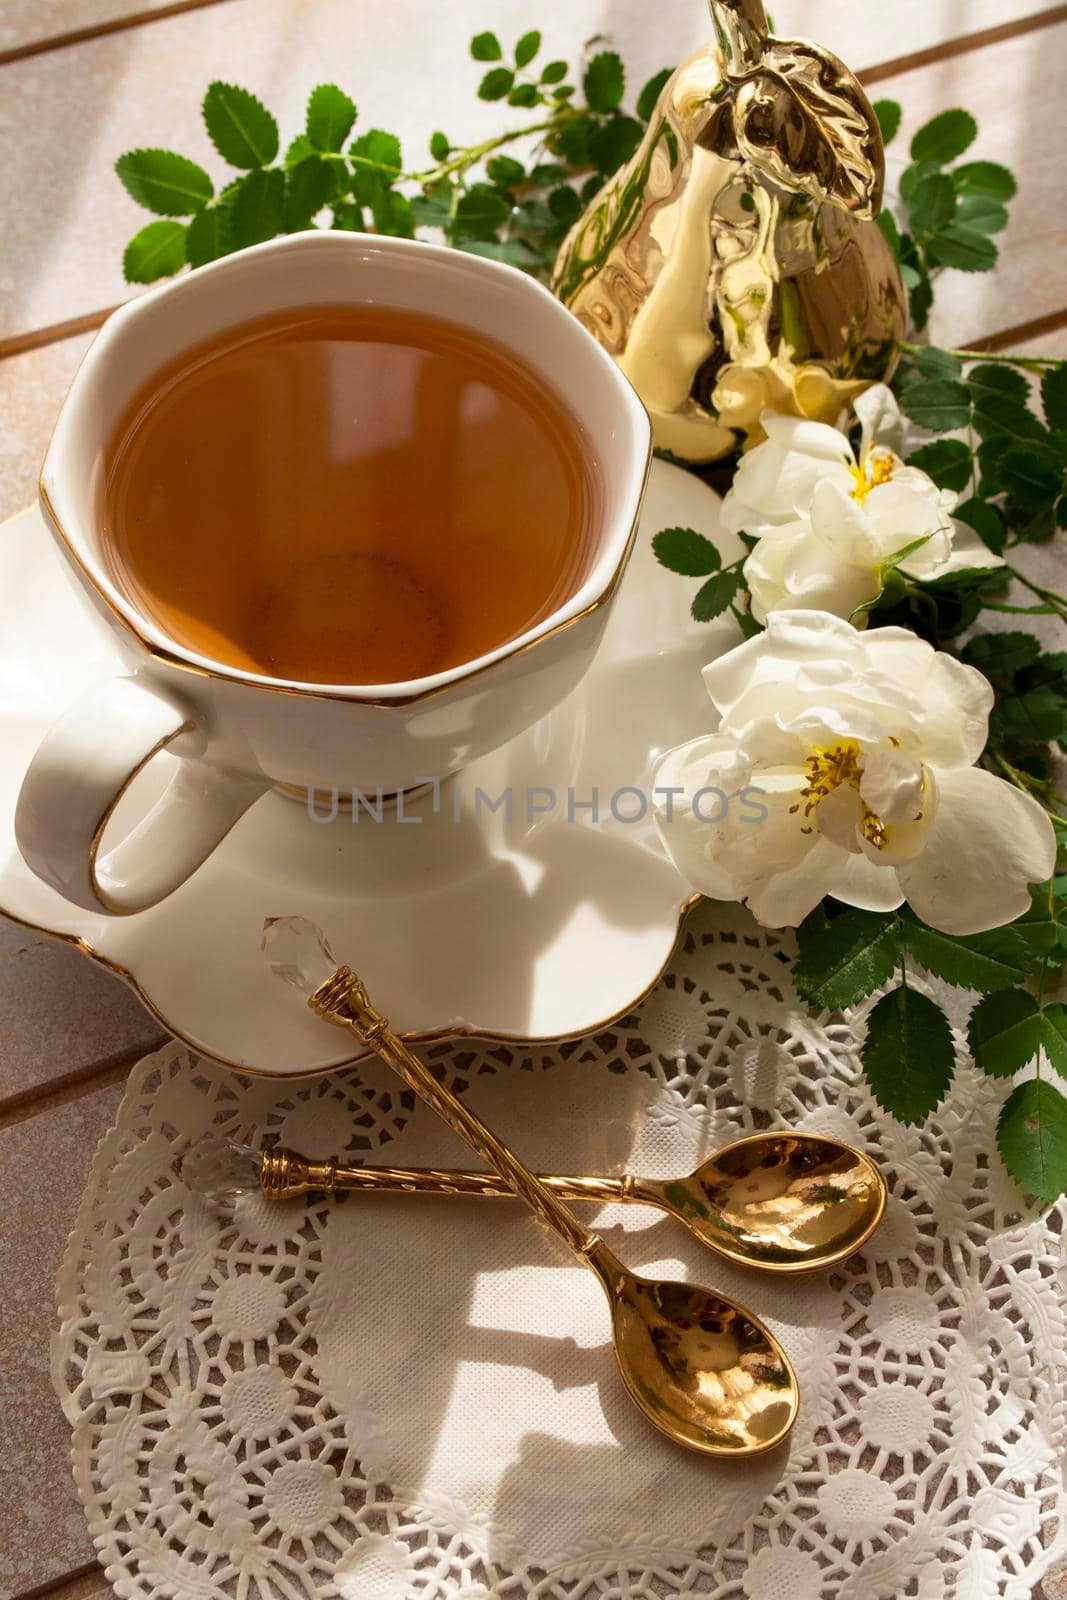 Tea in a china white cup and saucer, with white rose. Vertical image